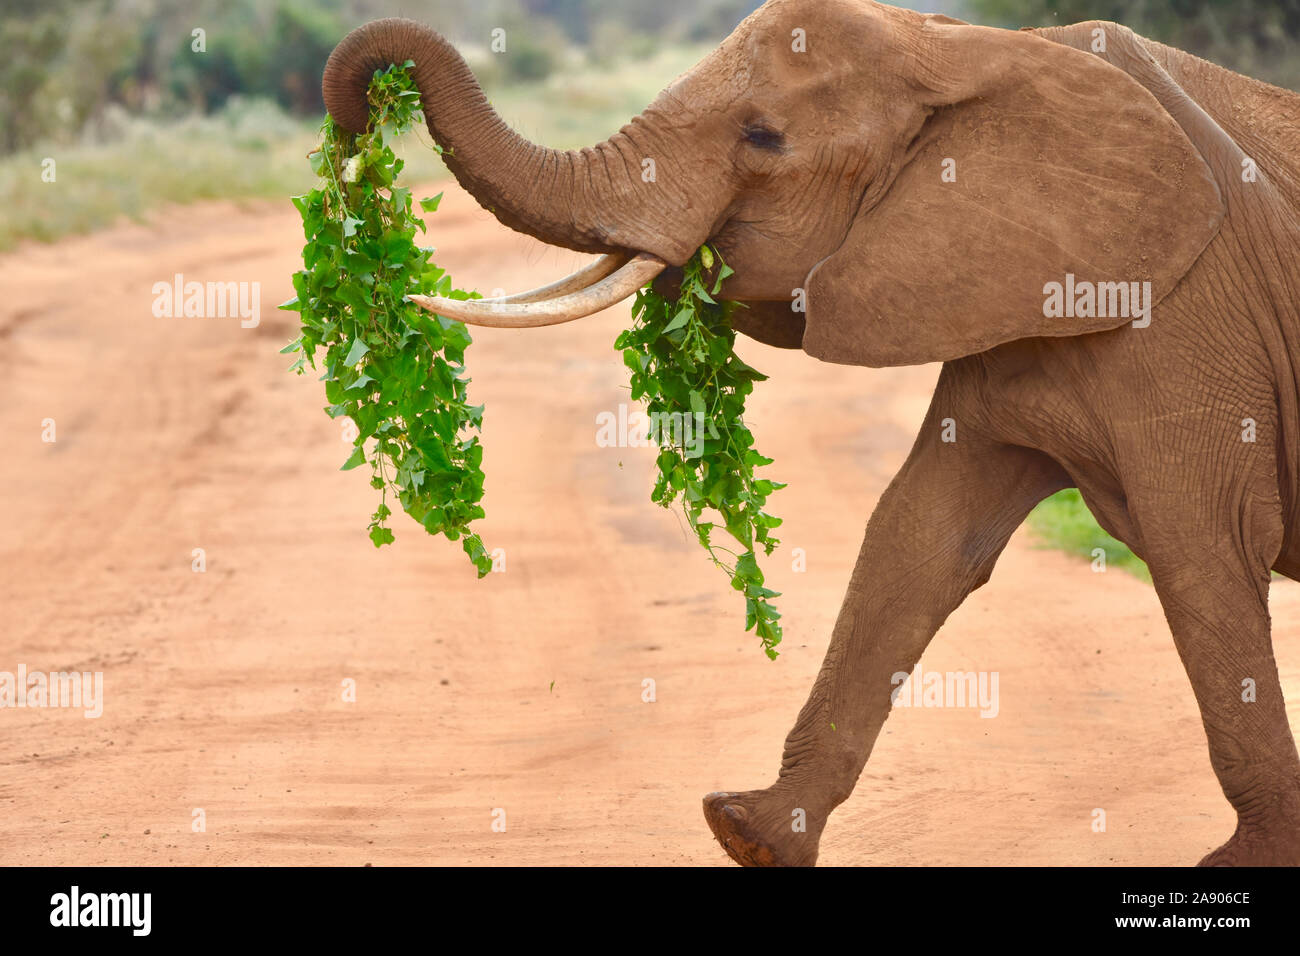 Lighthearted photo of elephant walking with vines hanging from its mouth and extended trunk. ( Stock Photo